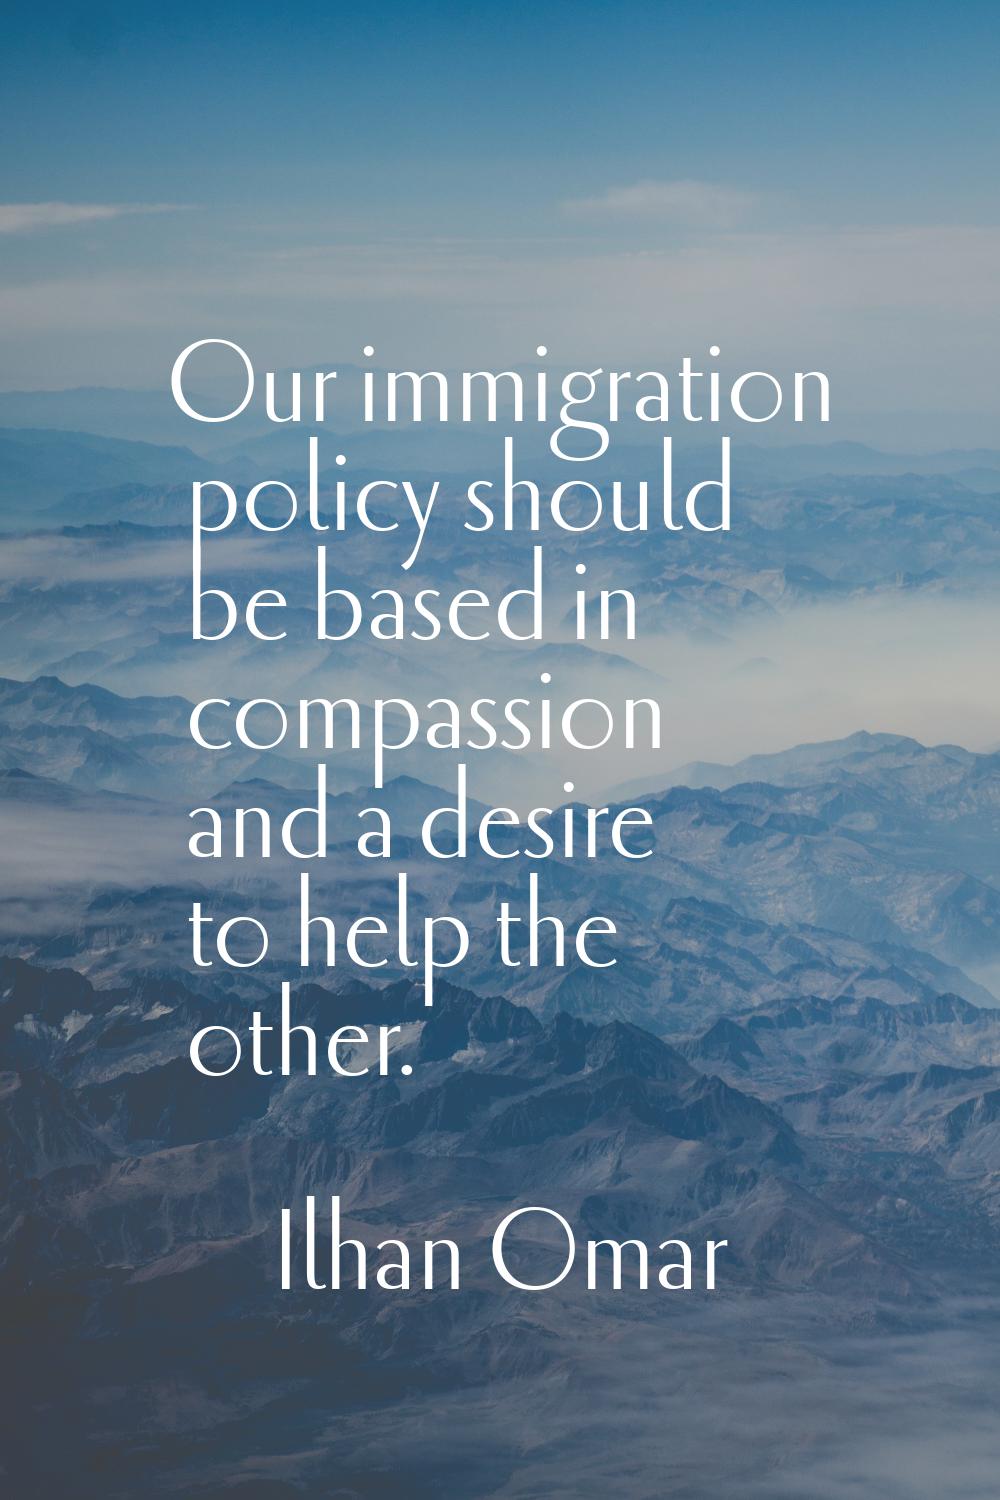 Our immigration policy should be based in compassion and a desire to help the other.